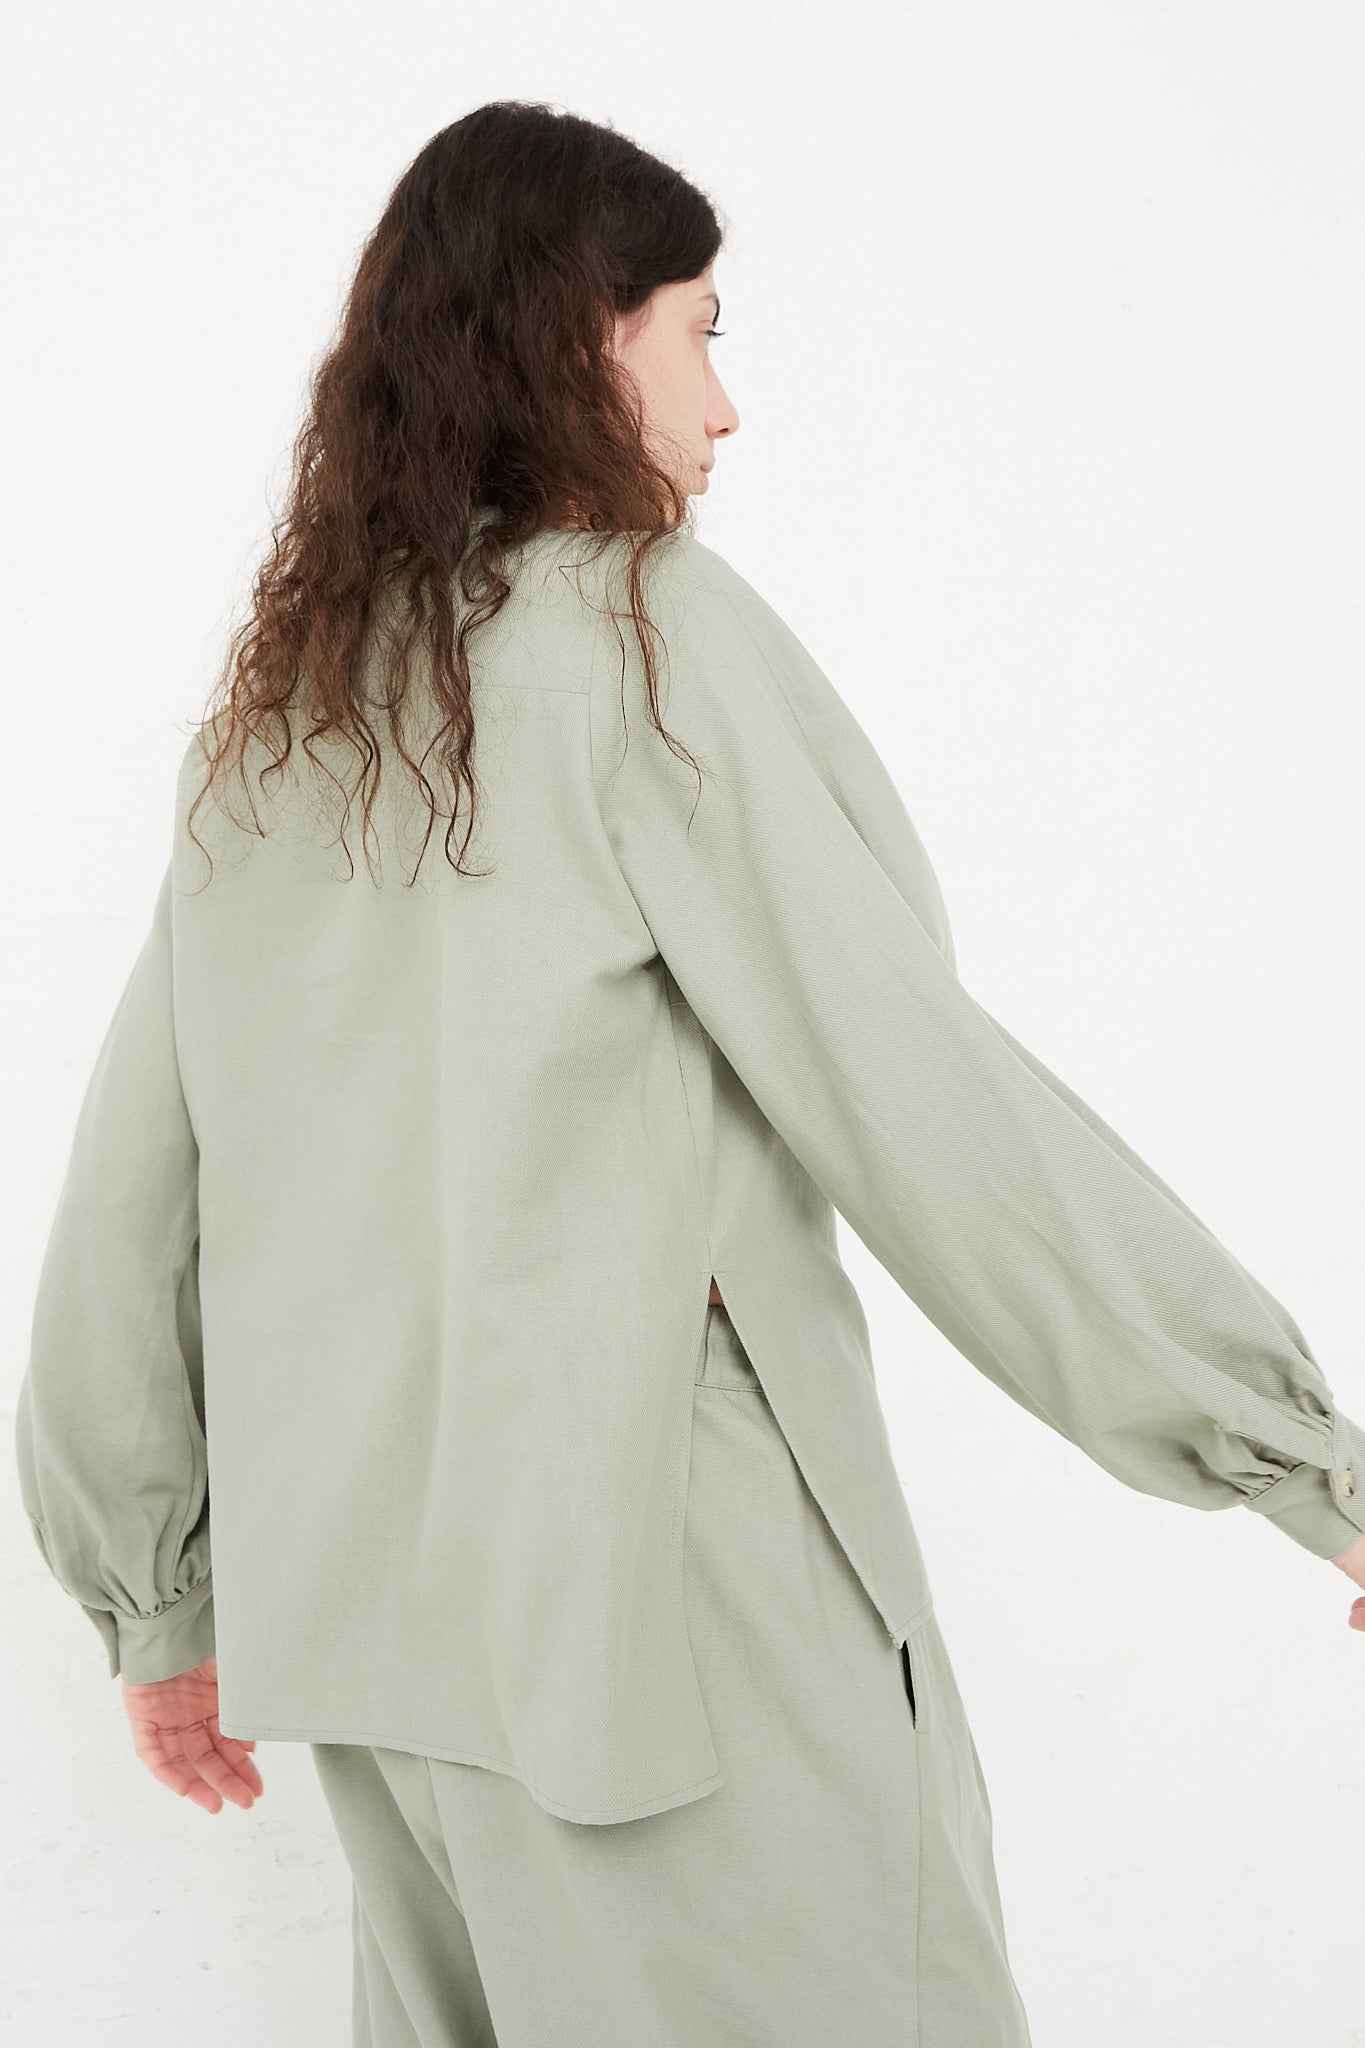 Cotton Twill Puff Sleeve Blouse in Agave by Black Crane for Oroboro Side